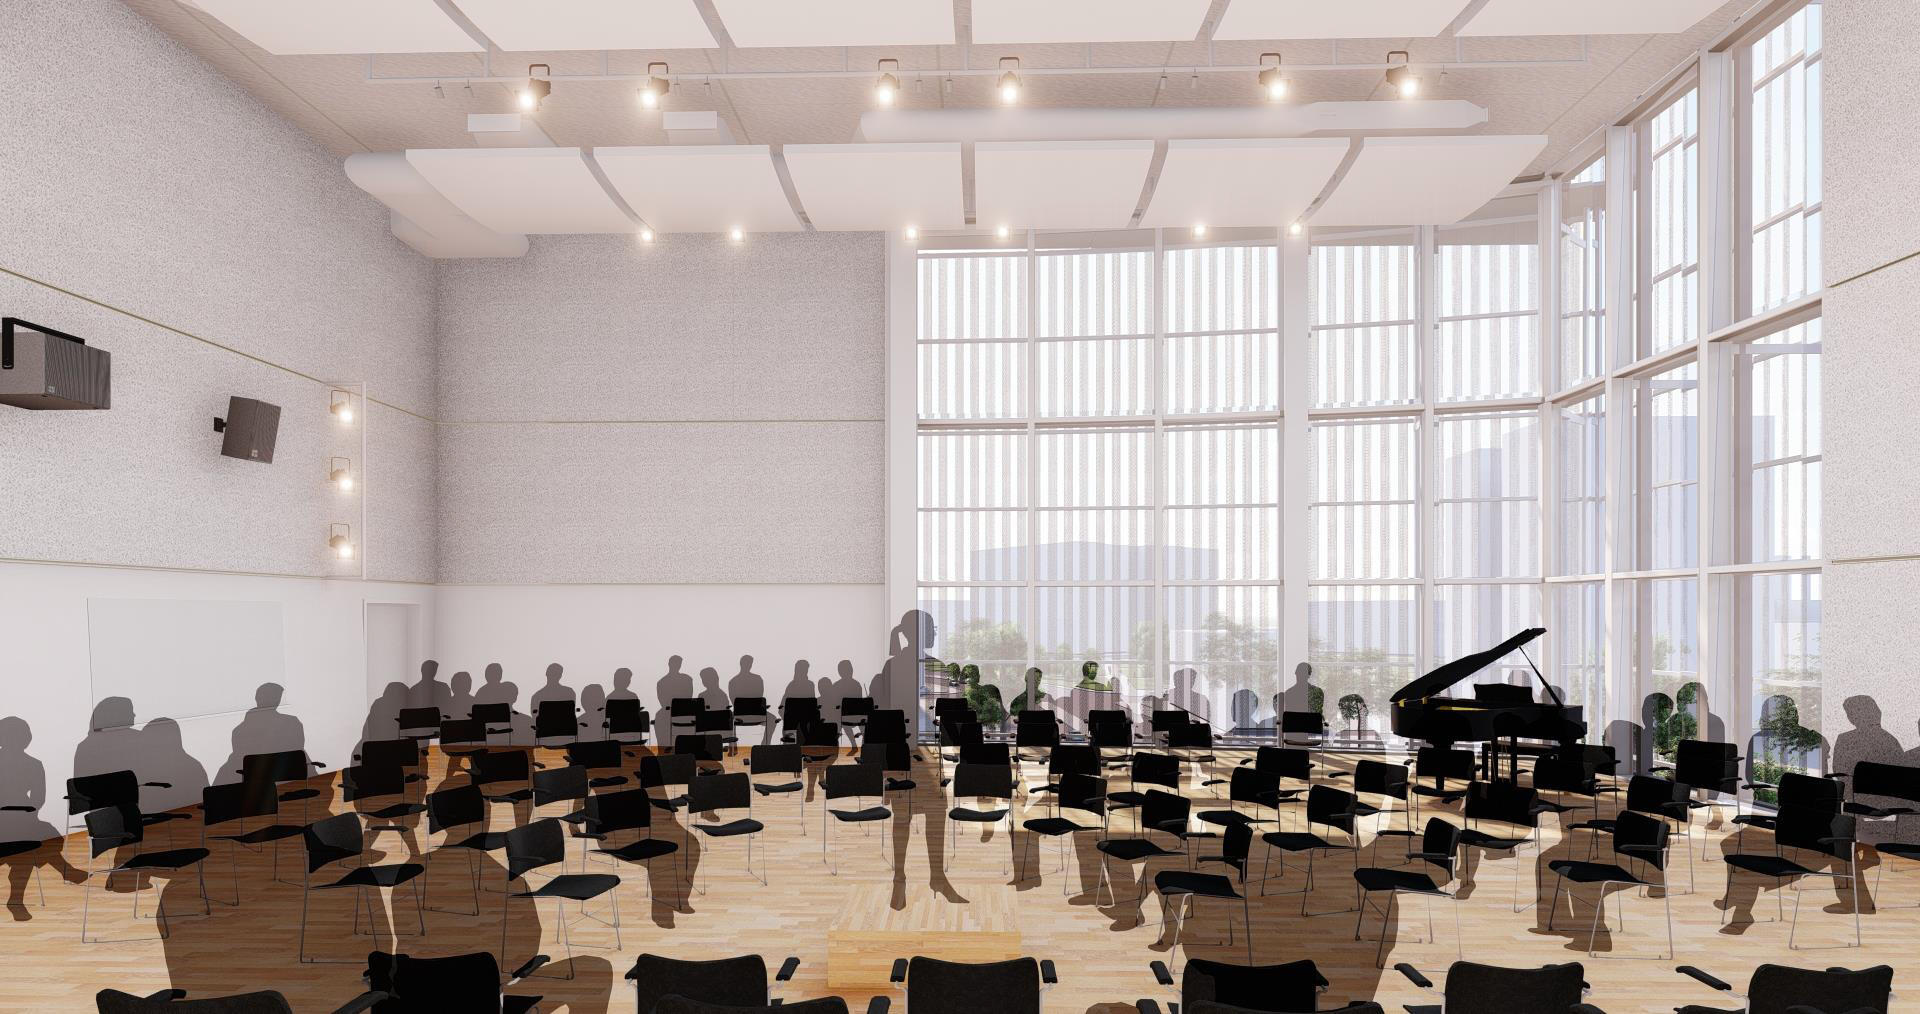 A 3D rendering of a reception hall filled with chairs and black opaque human figures occupying the room. 